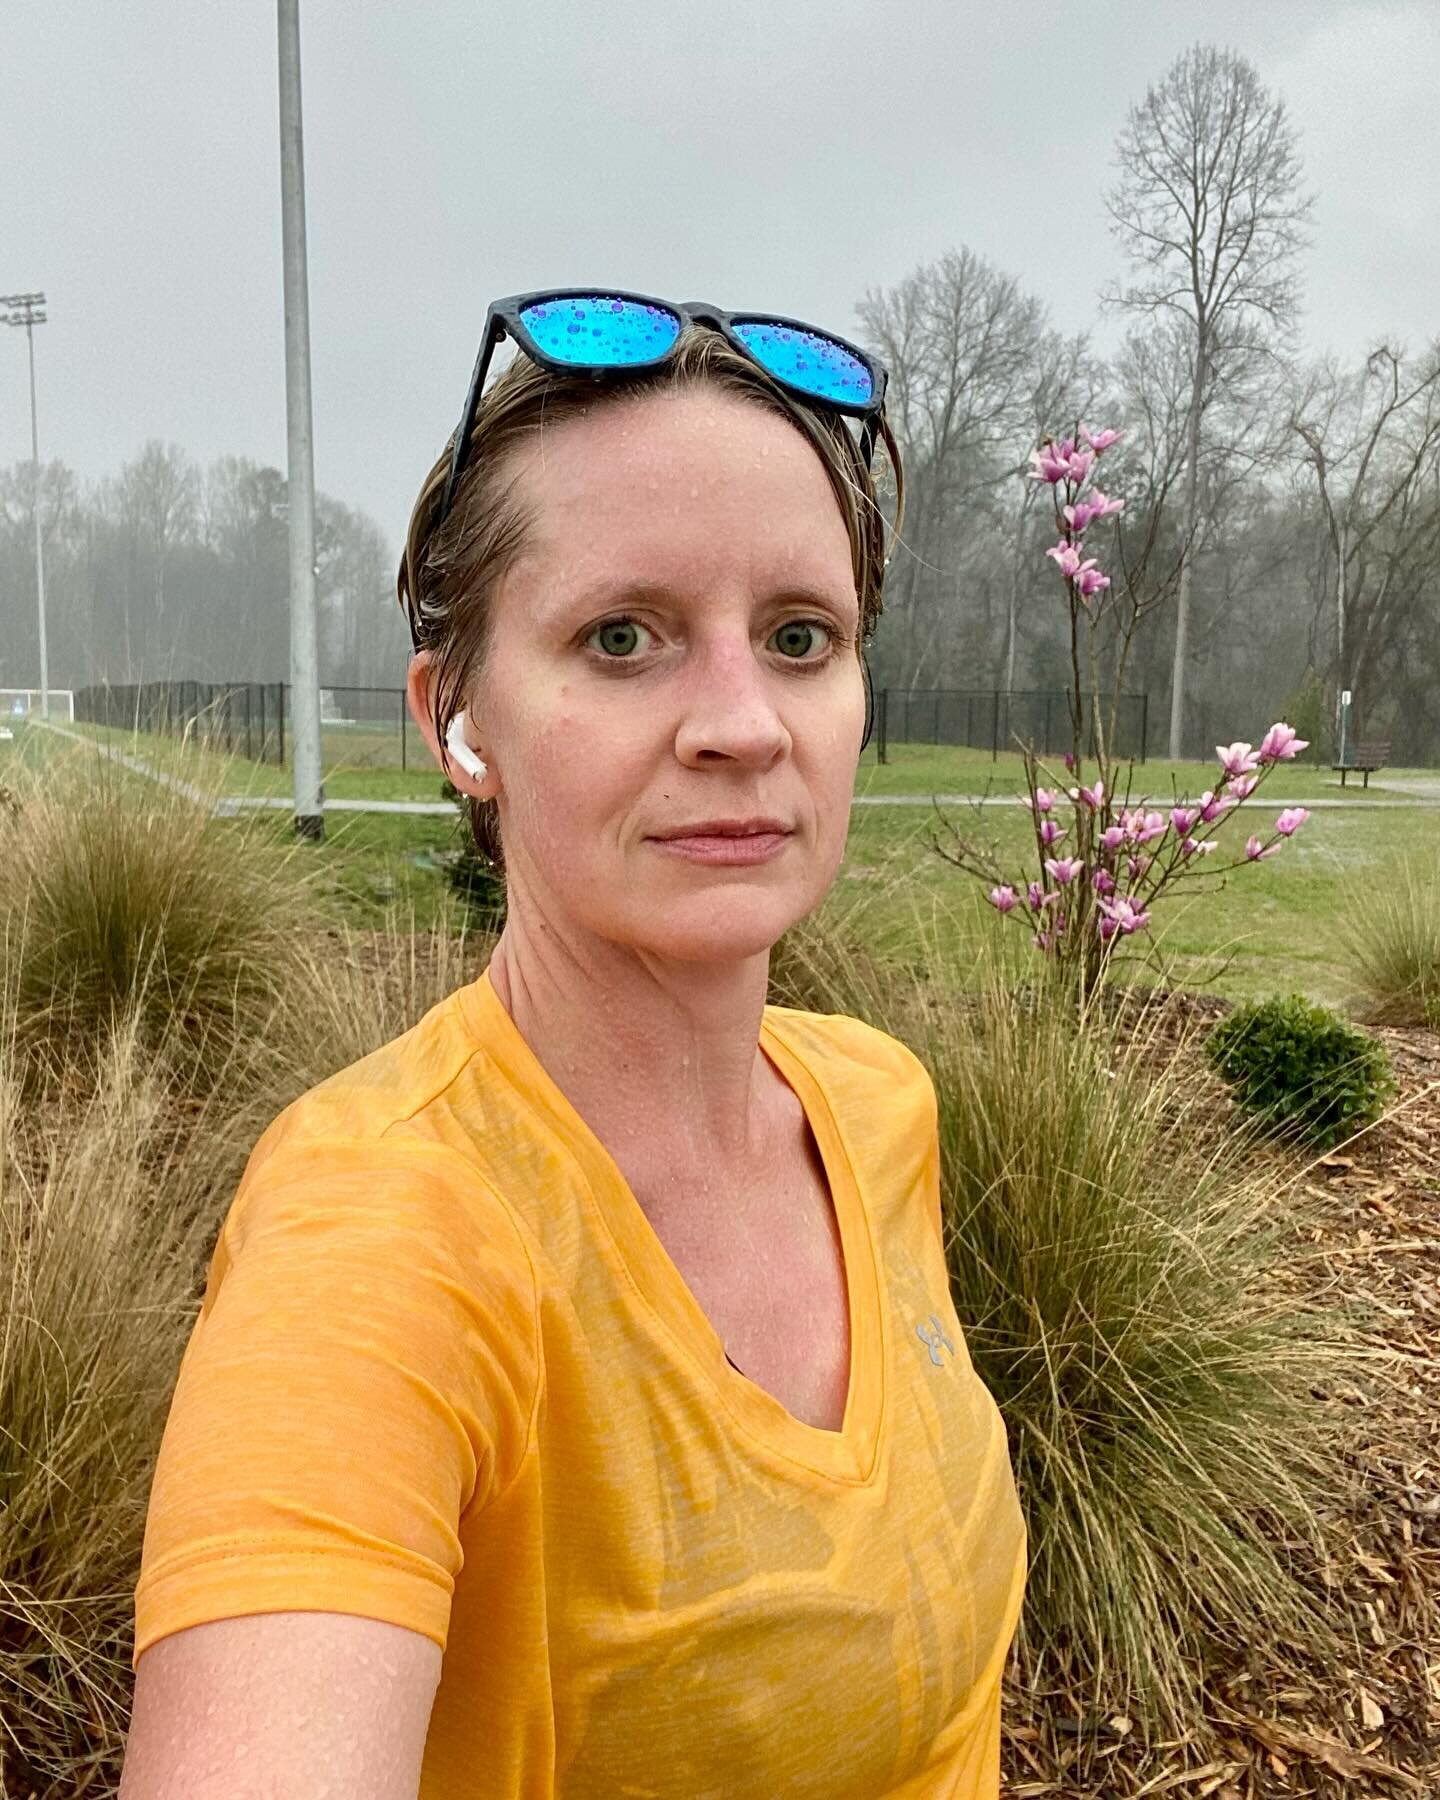 If there&rsquo;s one thing you should know about @laurakingedwards, it&rsquo;s that she never gives up. 

Laura is training for the @charlotteracefest Half Marathon on April 6. While she won&rsquo;t run blindfolded, Laura is angling for a personal re